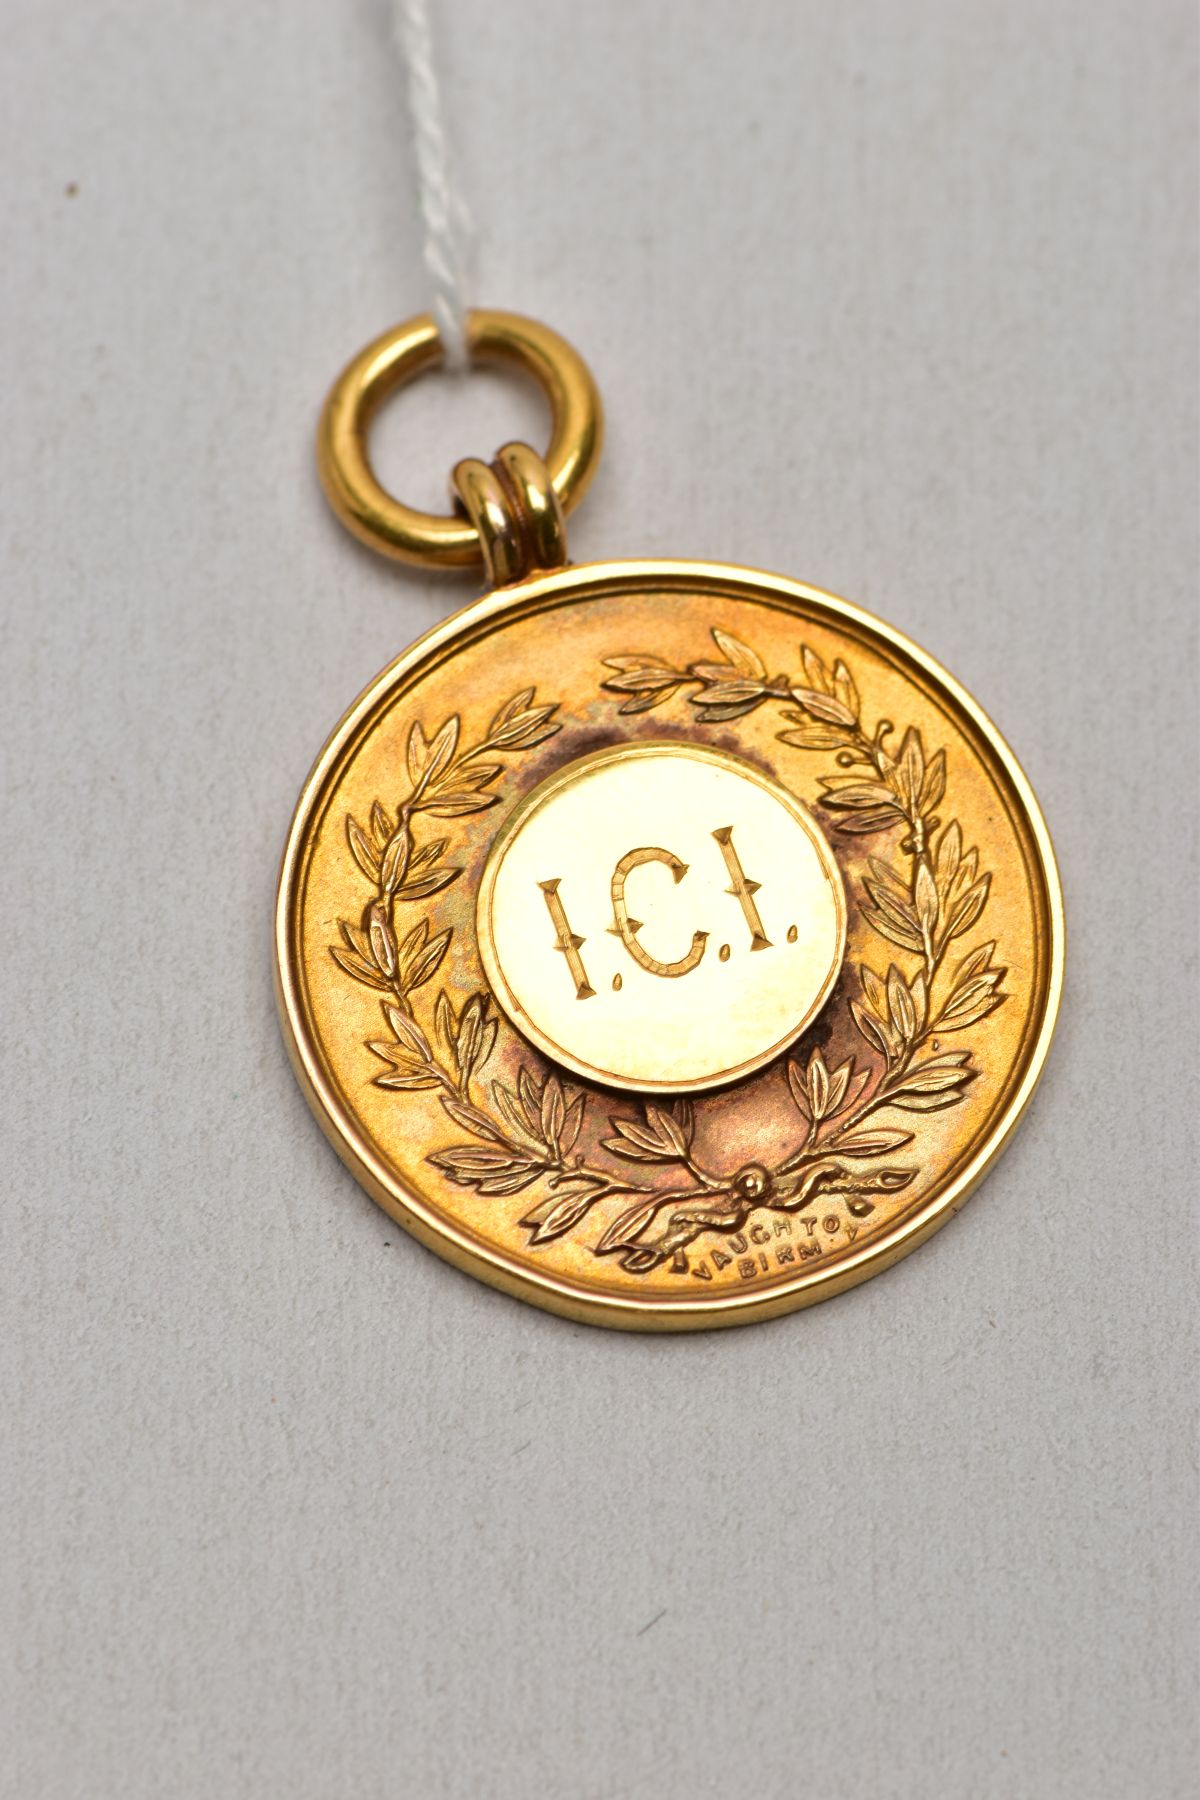 A 9CT GOLD FOB MEDAL, of a circular form, engraved to the front 'I.C.I' within a foliate wreath,